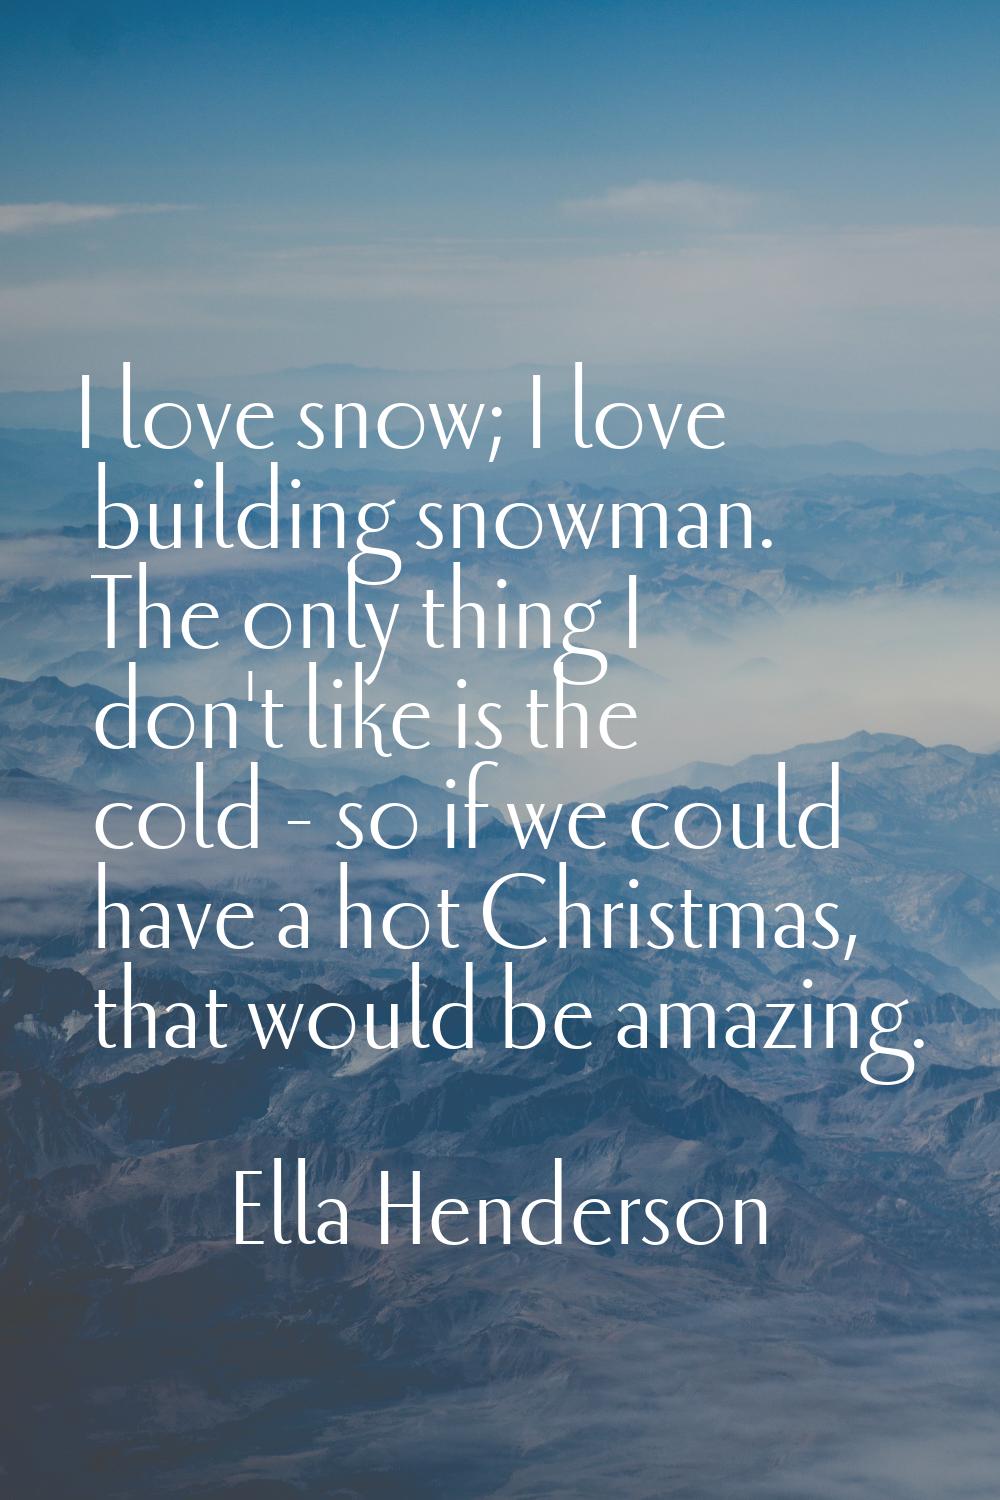 I love snow; I love building snowman. The only thing I don't like is the cold - so if we could have